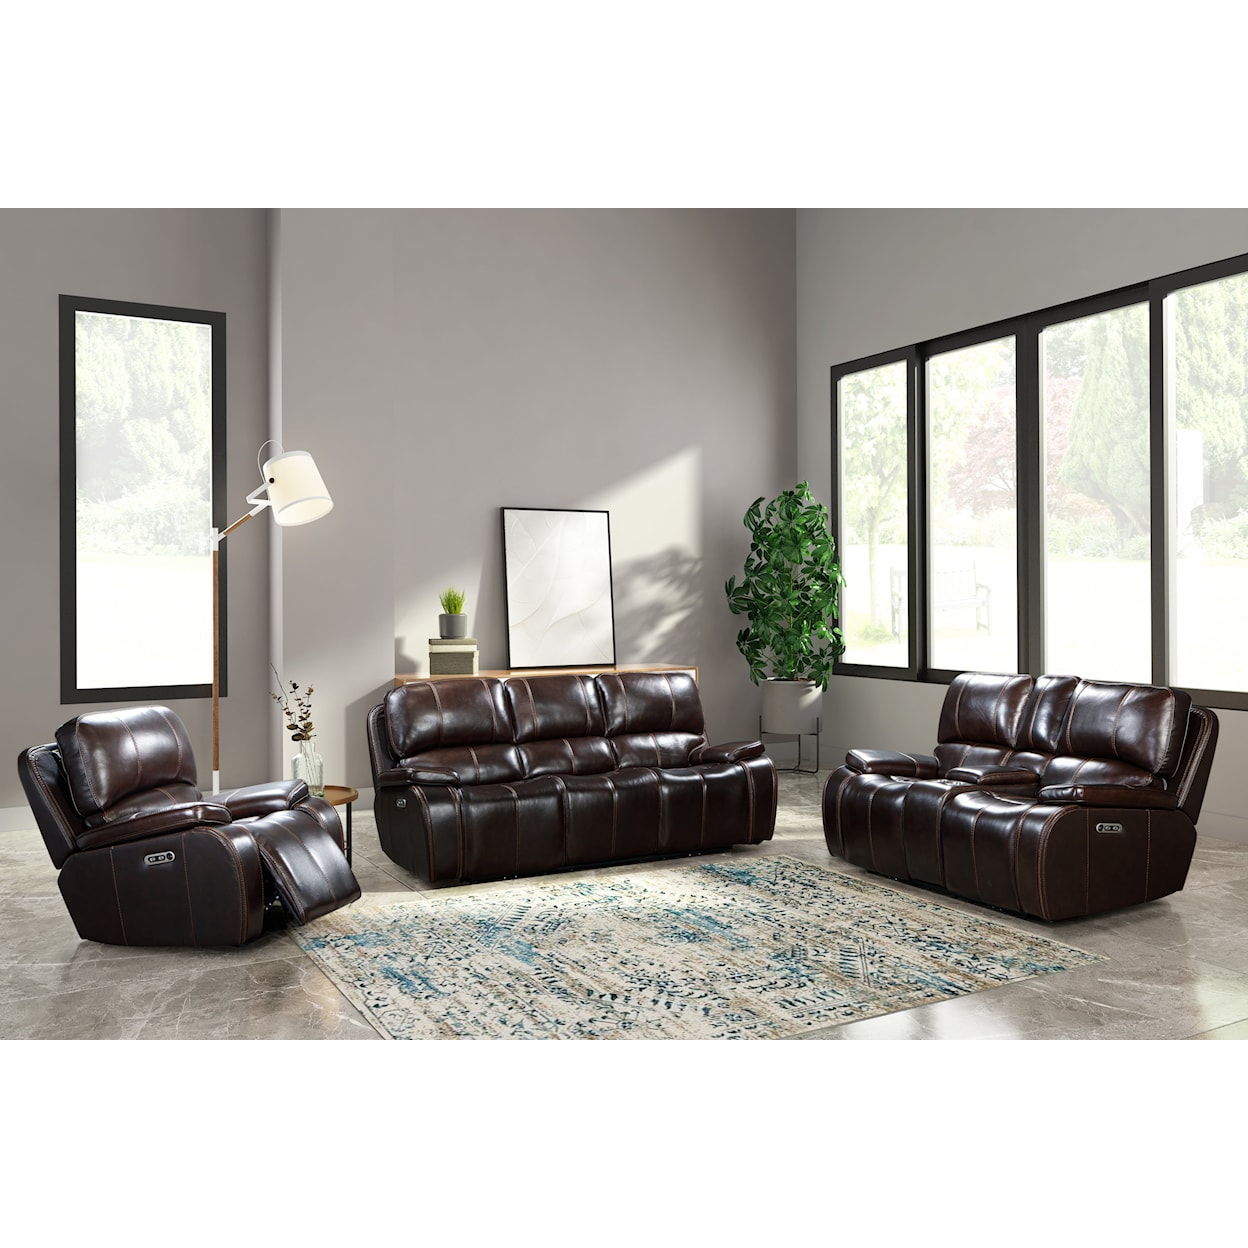 New Classic Brookings Leather Sofa